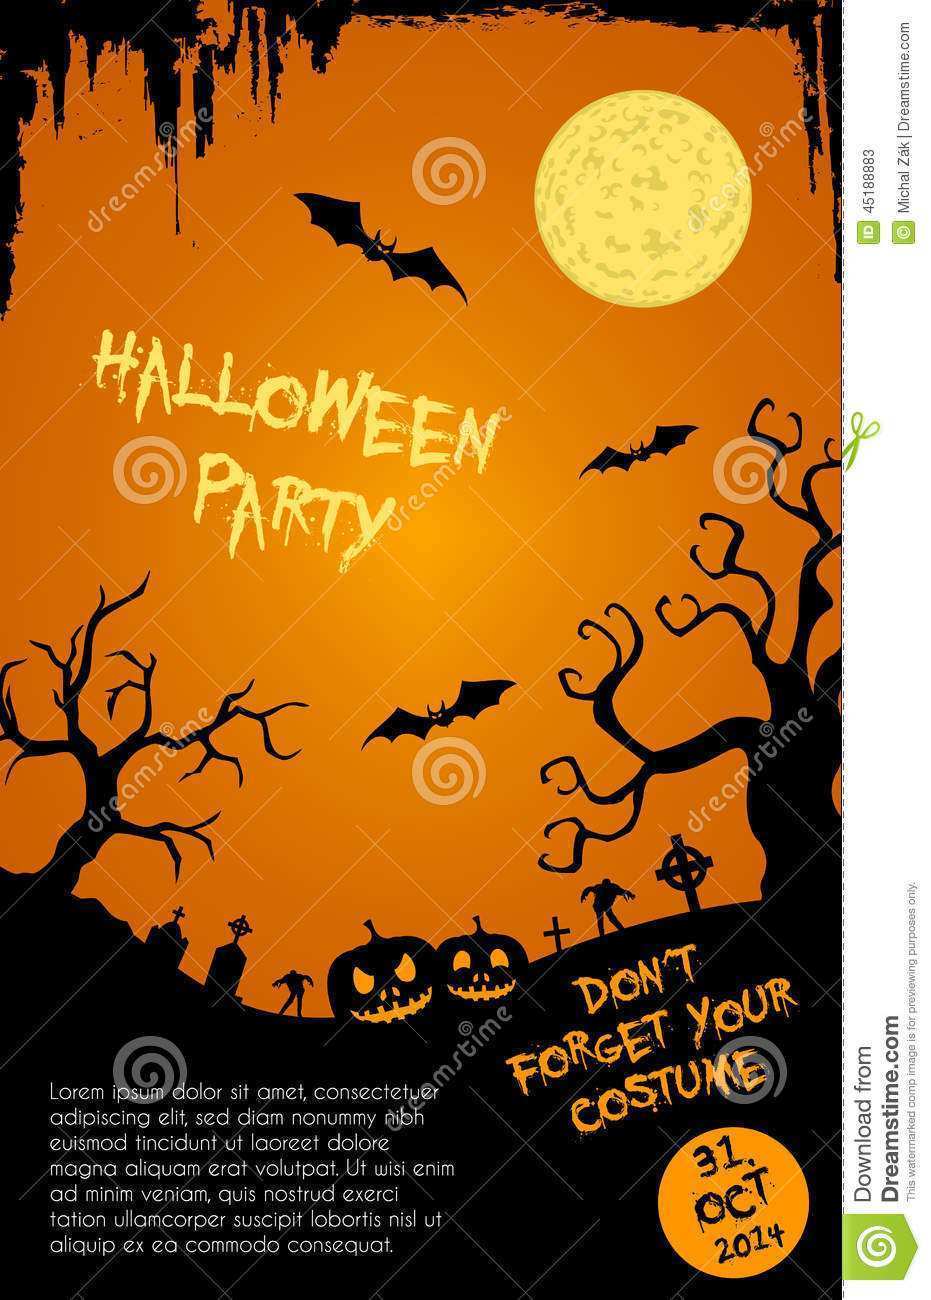 13 Blank Halloween Flyer Templates Photo with Halloween Flyer Templates